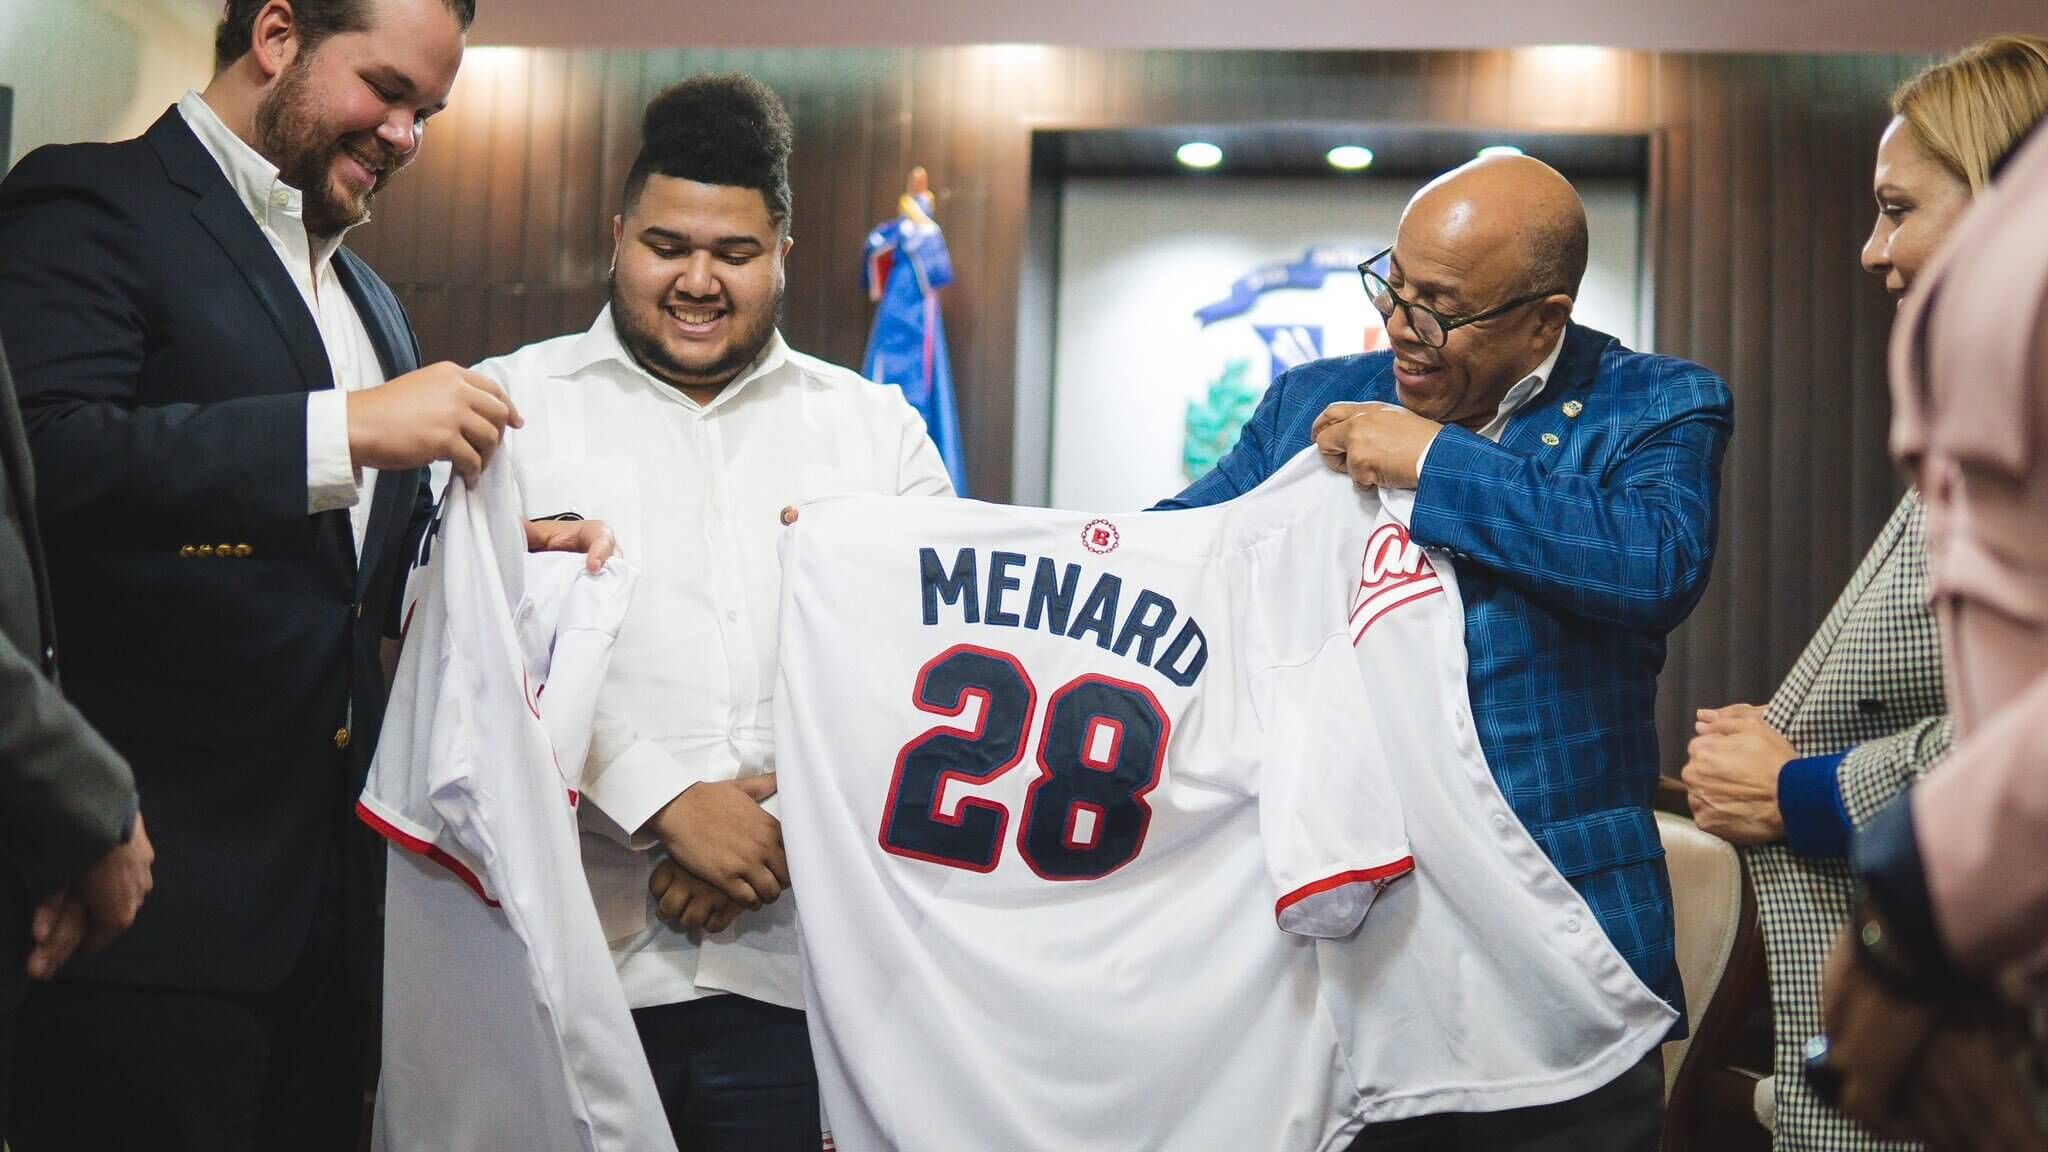 MenaRD Visits Dominican Lawmakers to Promote esports In the Country